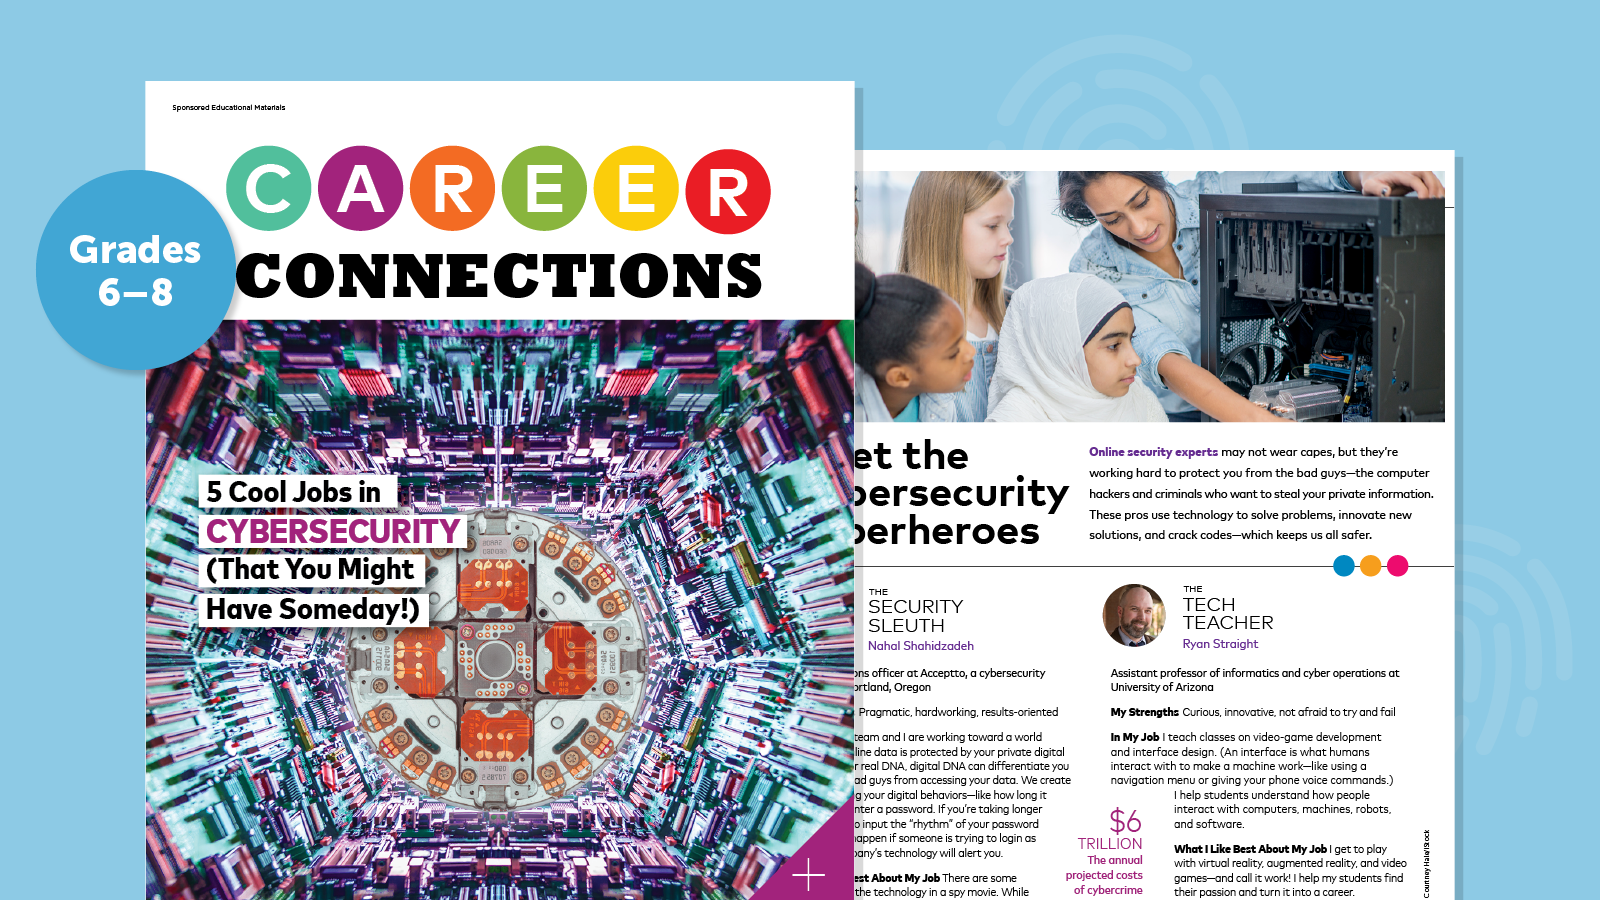 Student Magazine: Cool Jobs in Cybersecurity